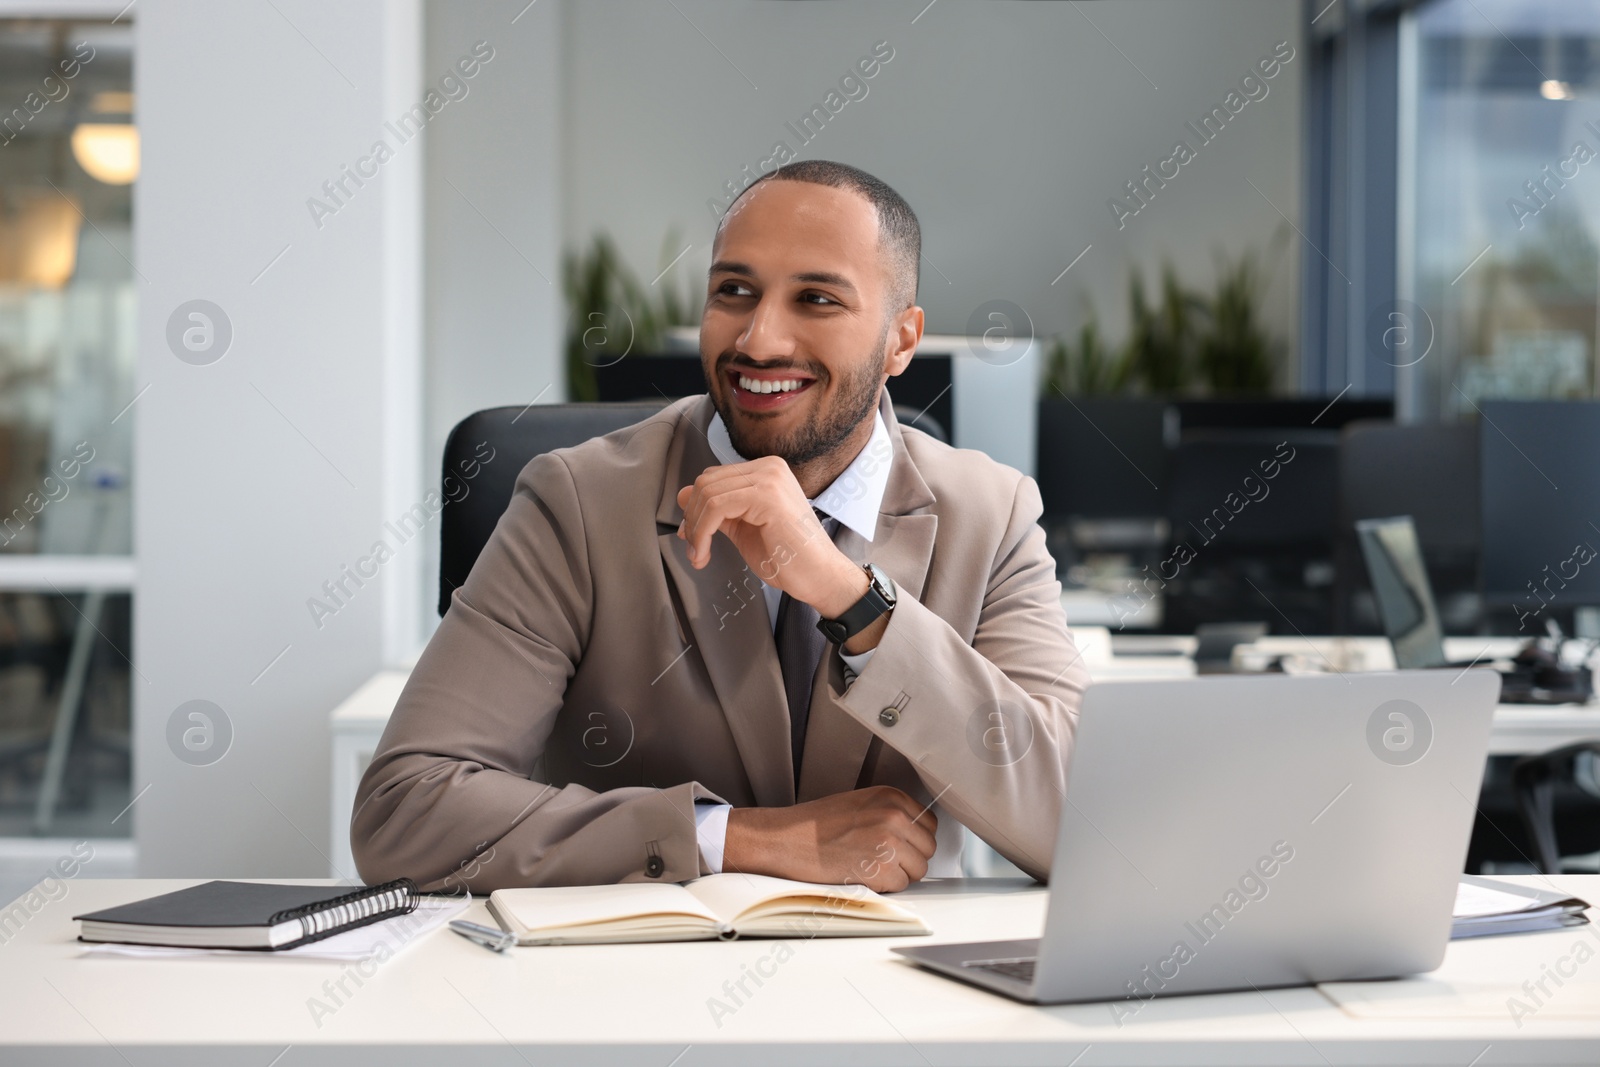 Photo of Happy man working at table in office. Lawyer, businessman, accountant or manager